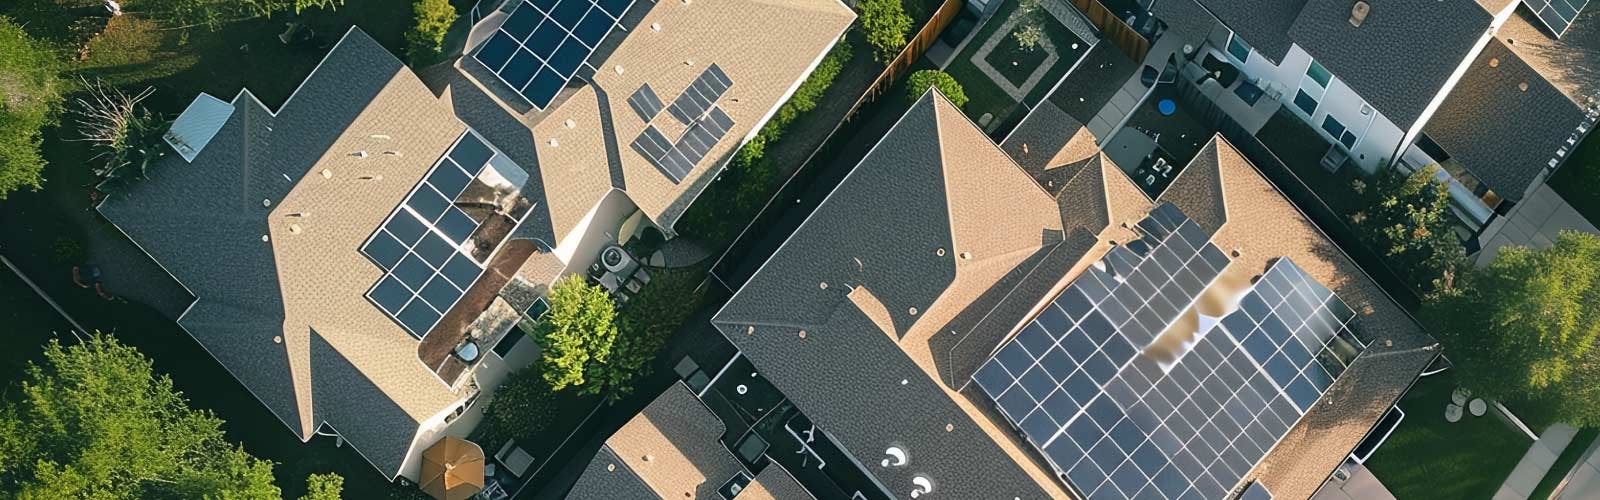 Homes with solar panels on the roofs